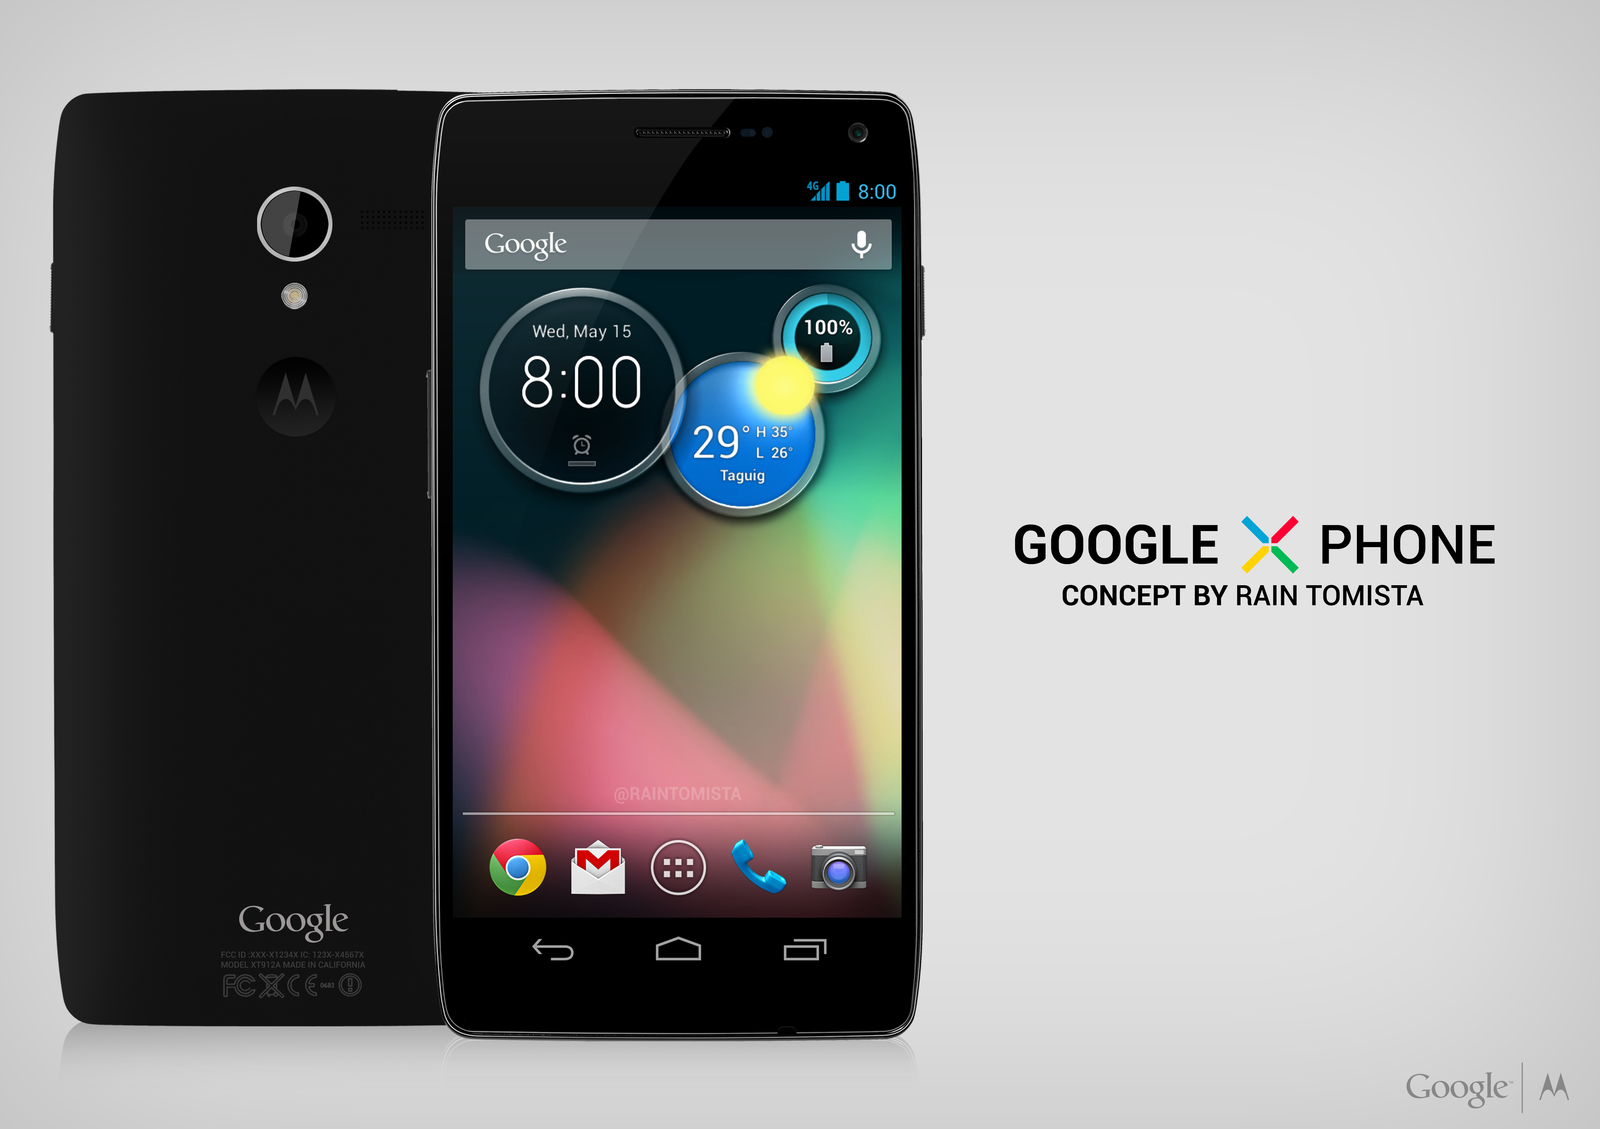 A Google X Phone Concept shows off a possible look for Google's Motorola X Phone.